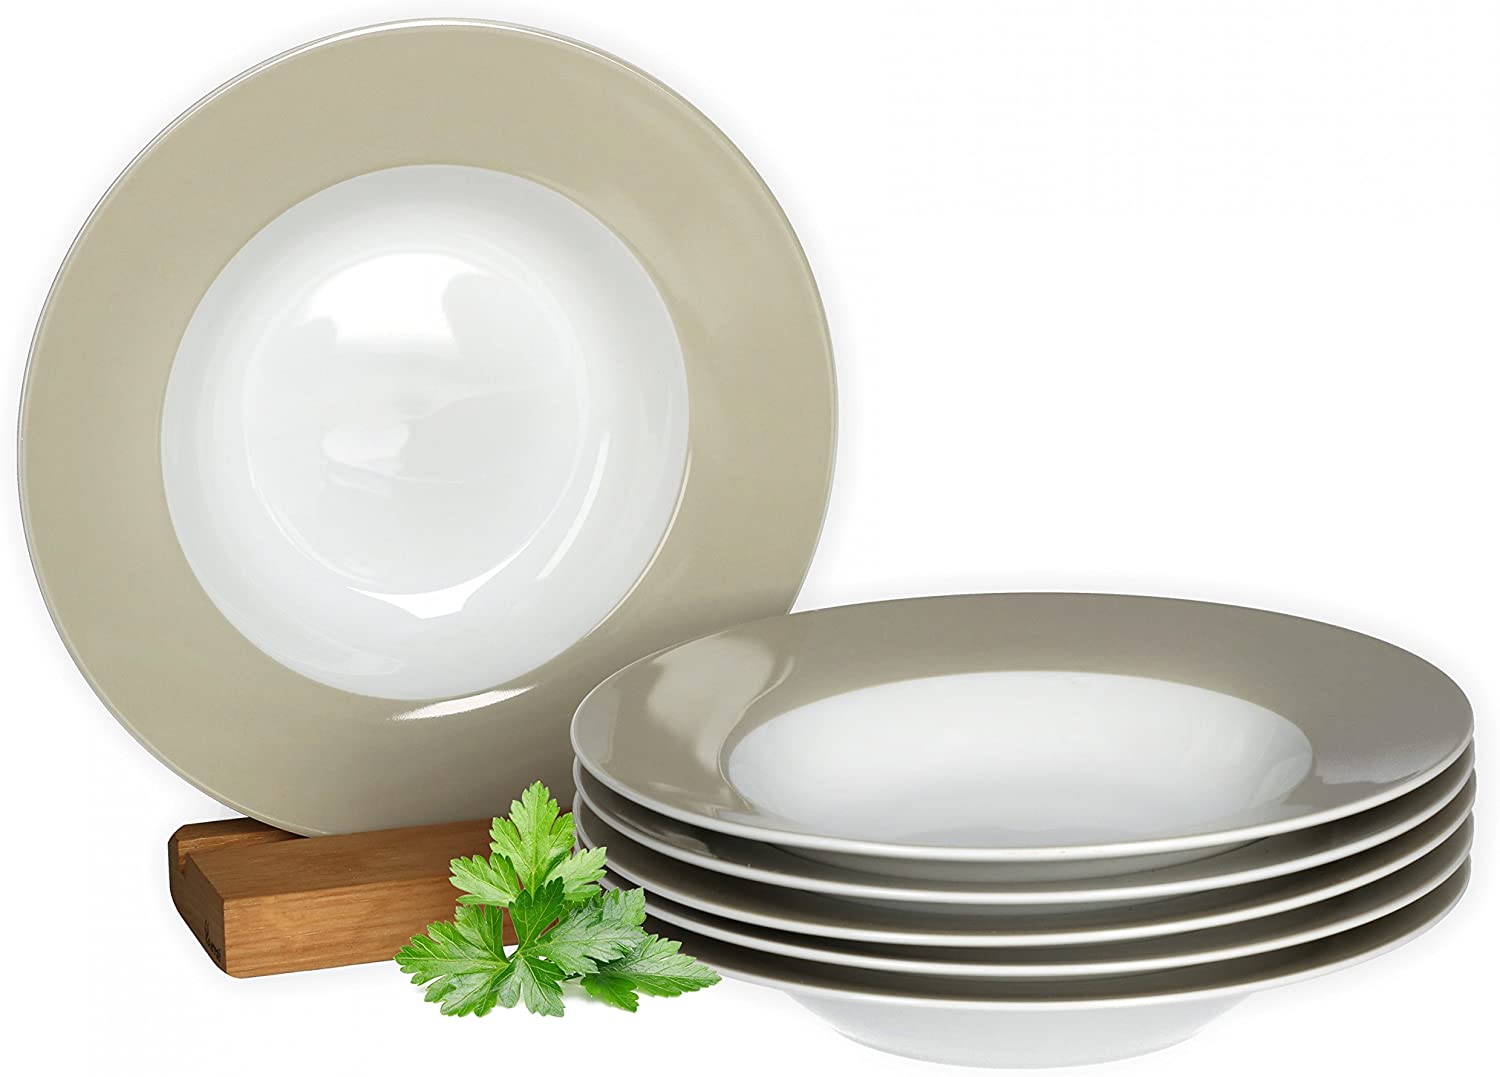 Van Well Vario Soup Plate Set 6 Pieces I Plate Service for 6 People I Deep Pasta Plate 21.5 cm I Porcelain Set White with Beige Rim I Salad Plate Microwavable